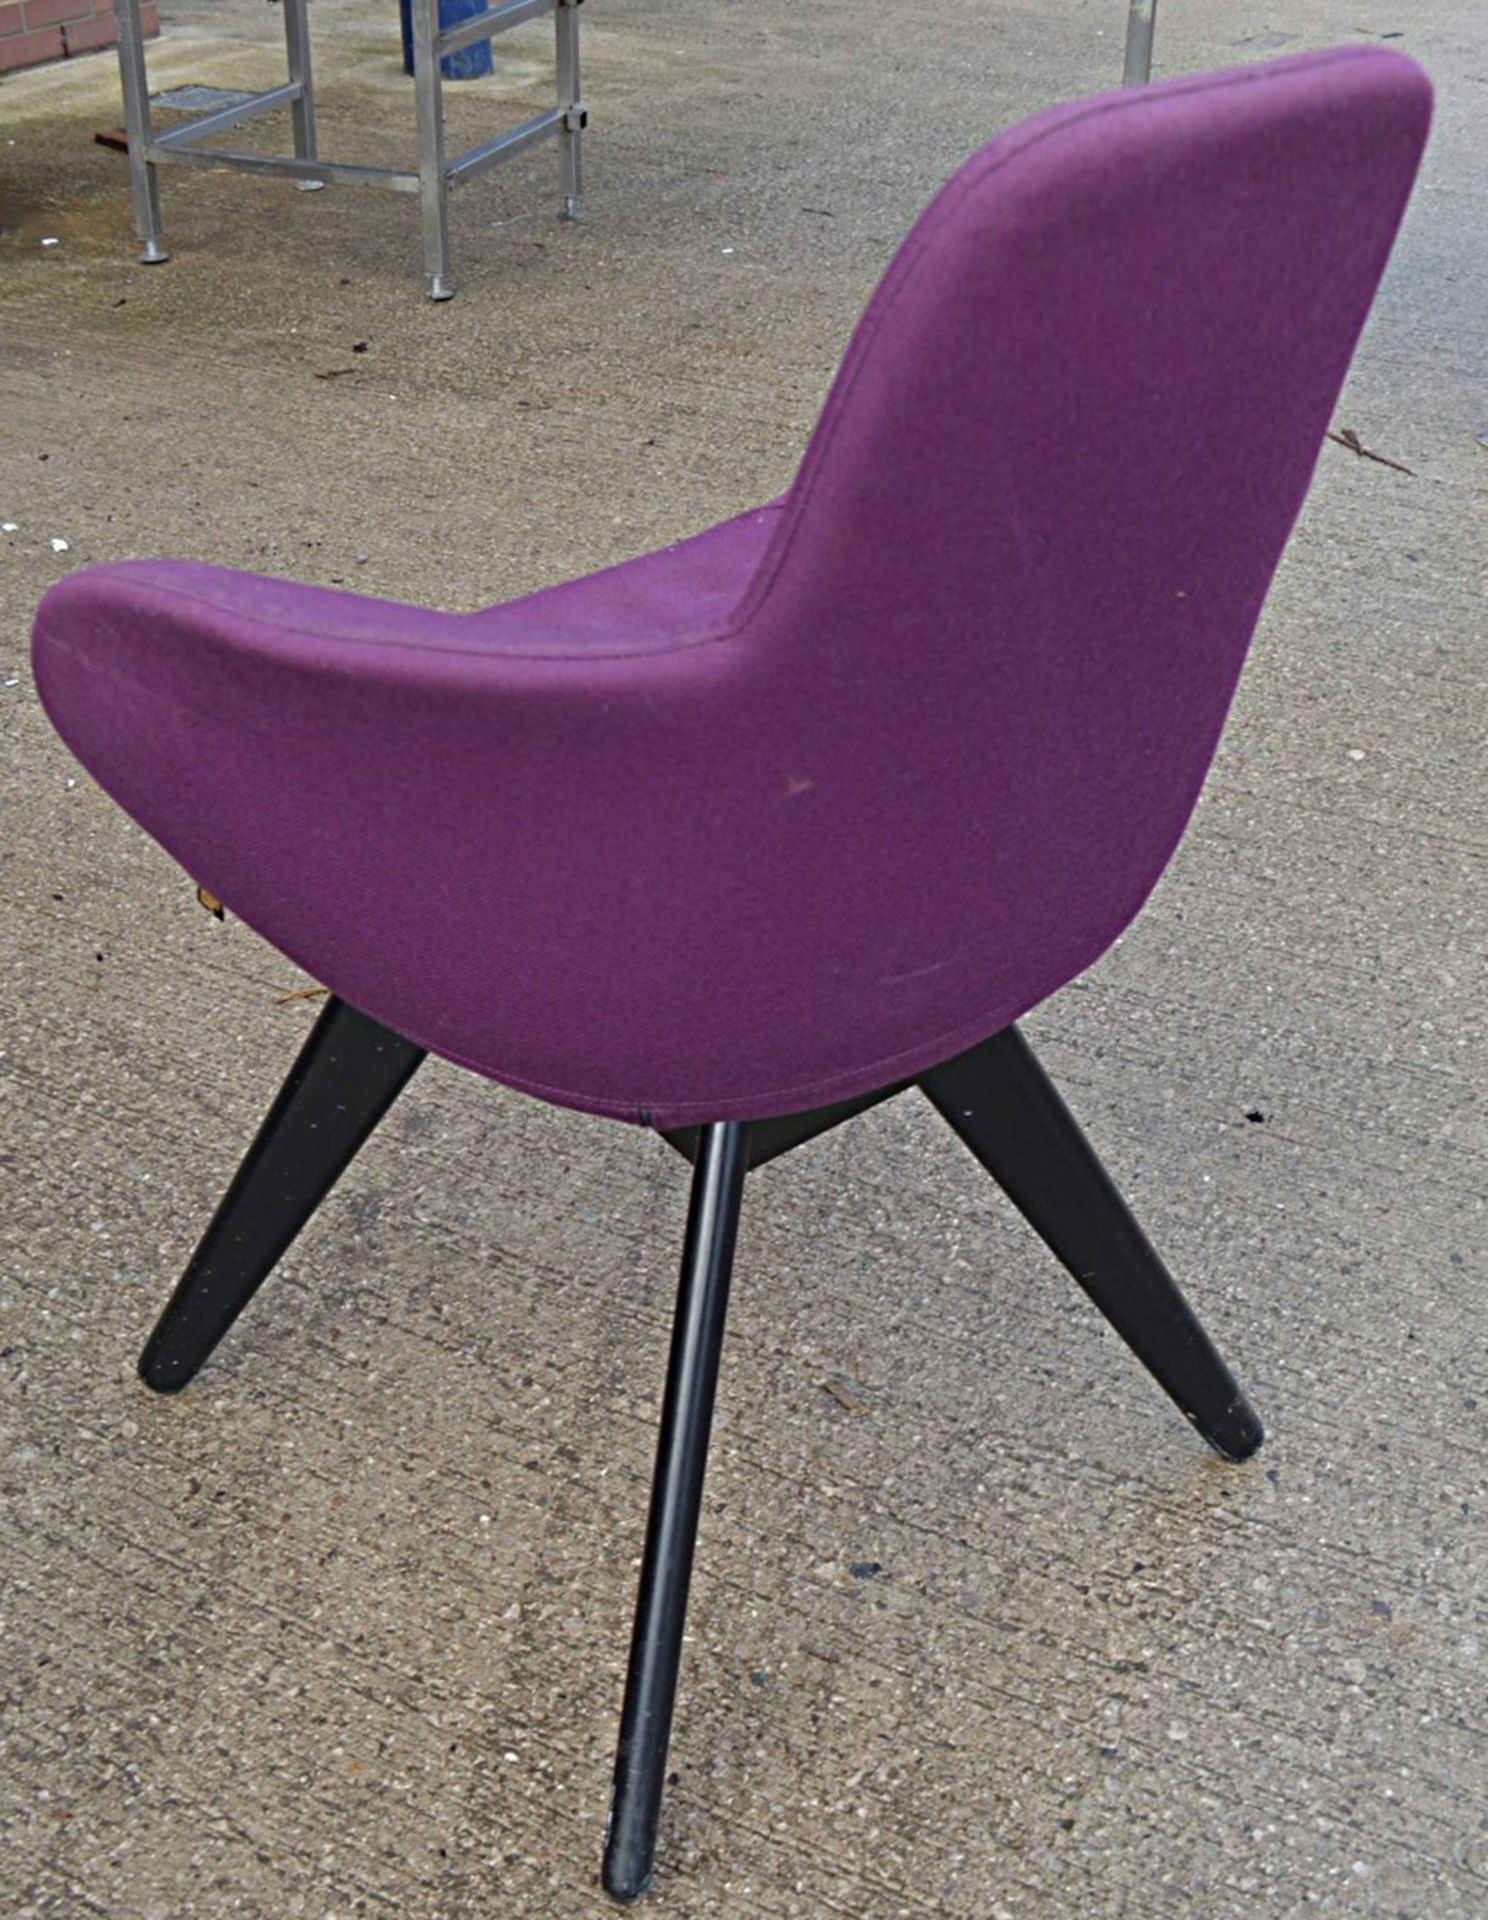 9 x TOM DIXON High Back Designer Scoop Chair - Upholstered In A Vibrant Purple Mollie Melton Fabric - Image 4 of 8